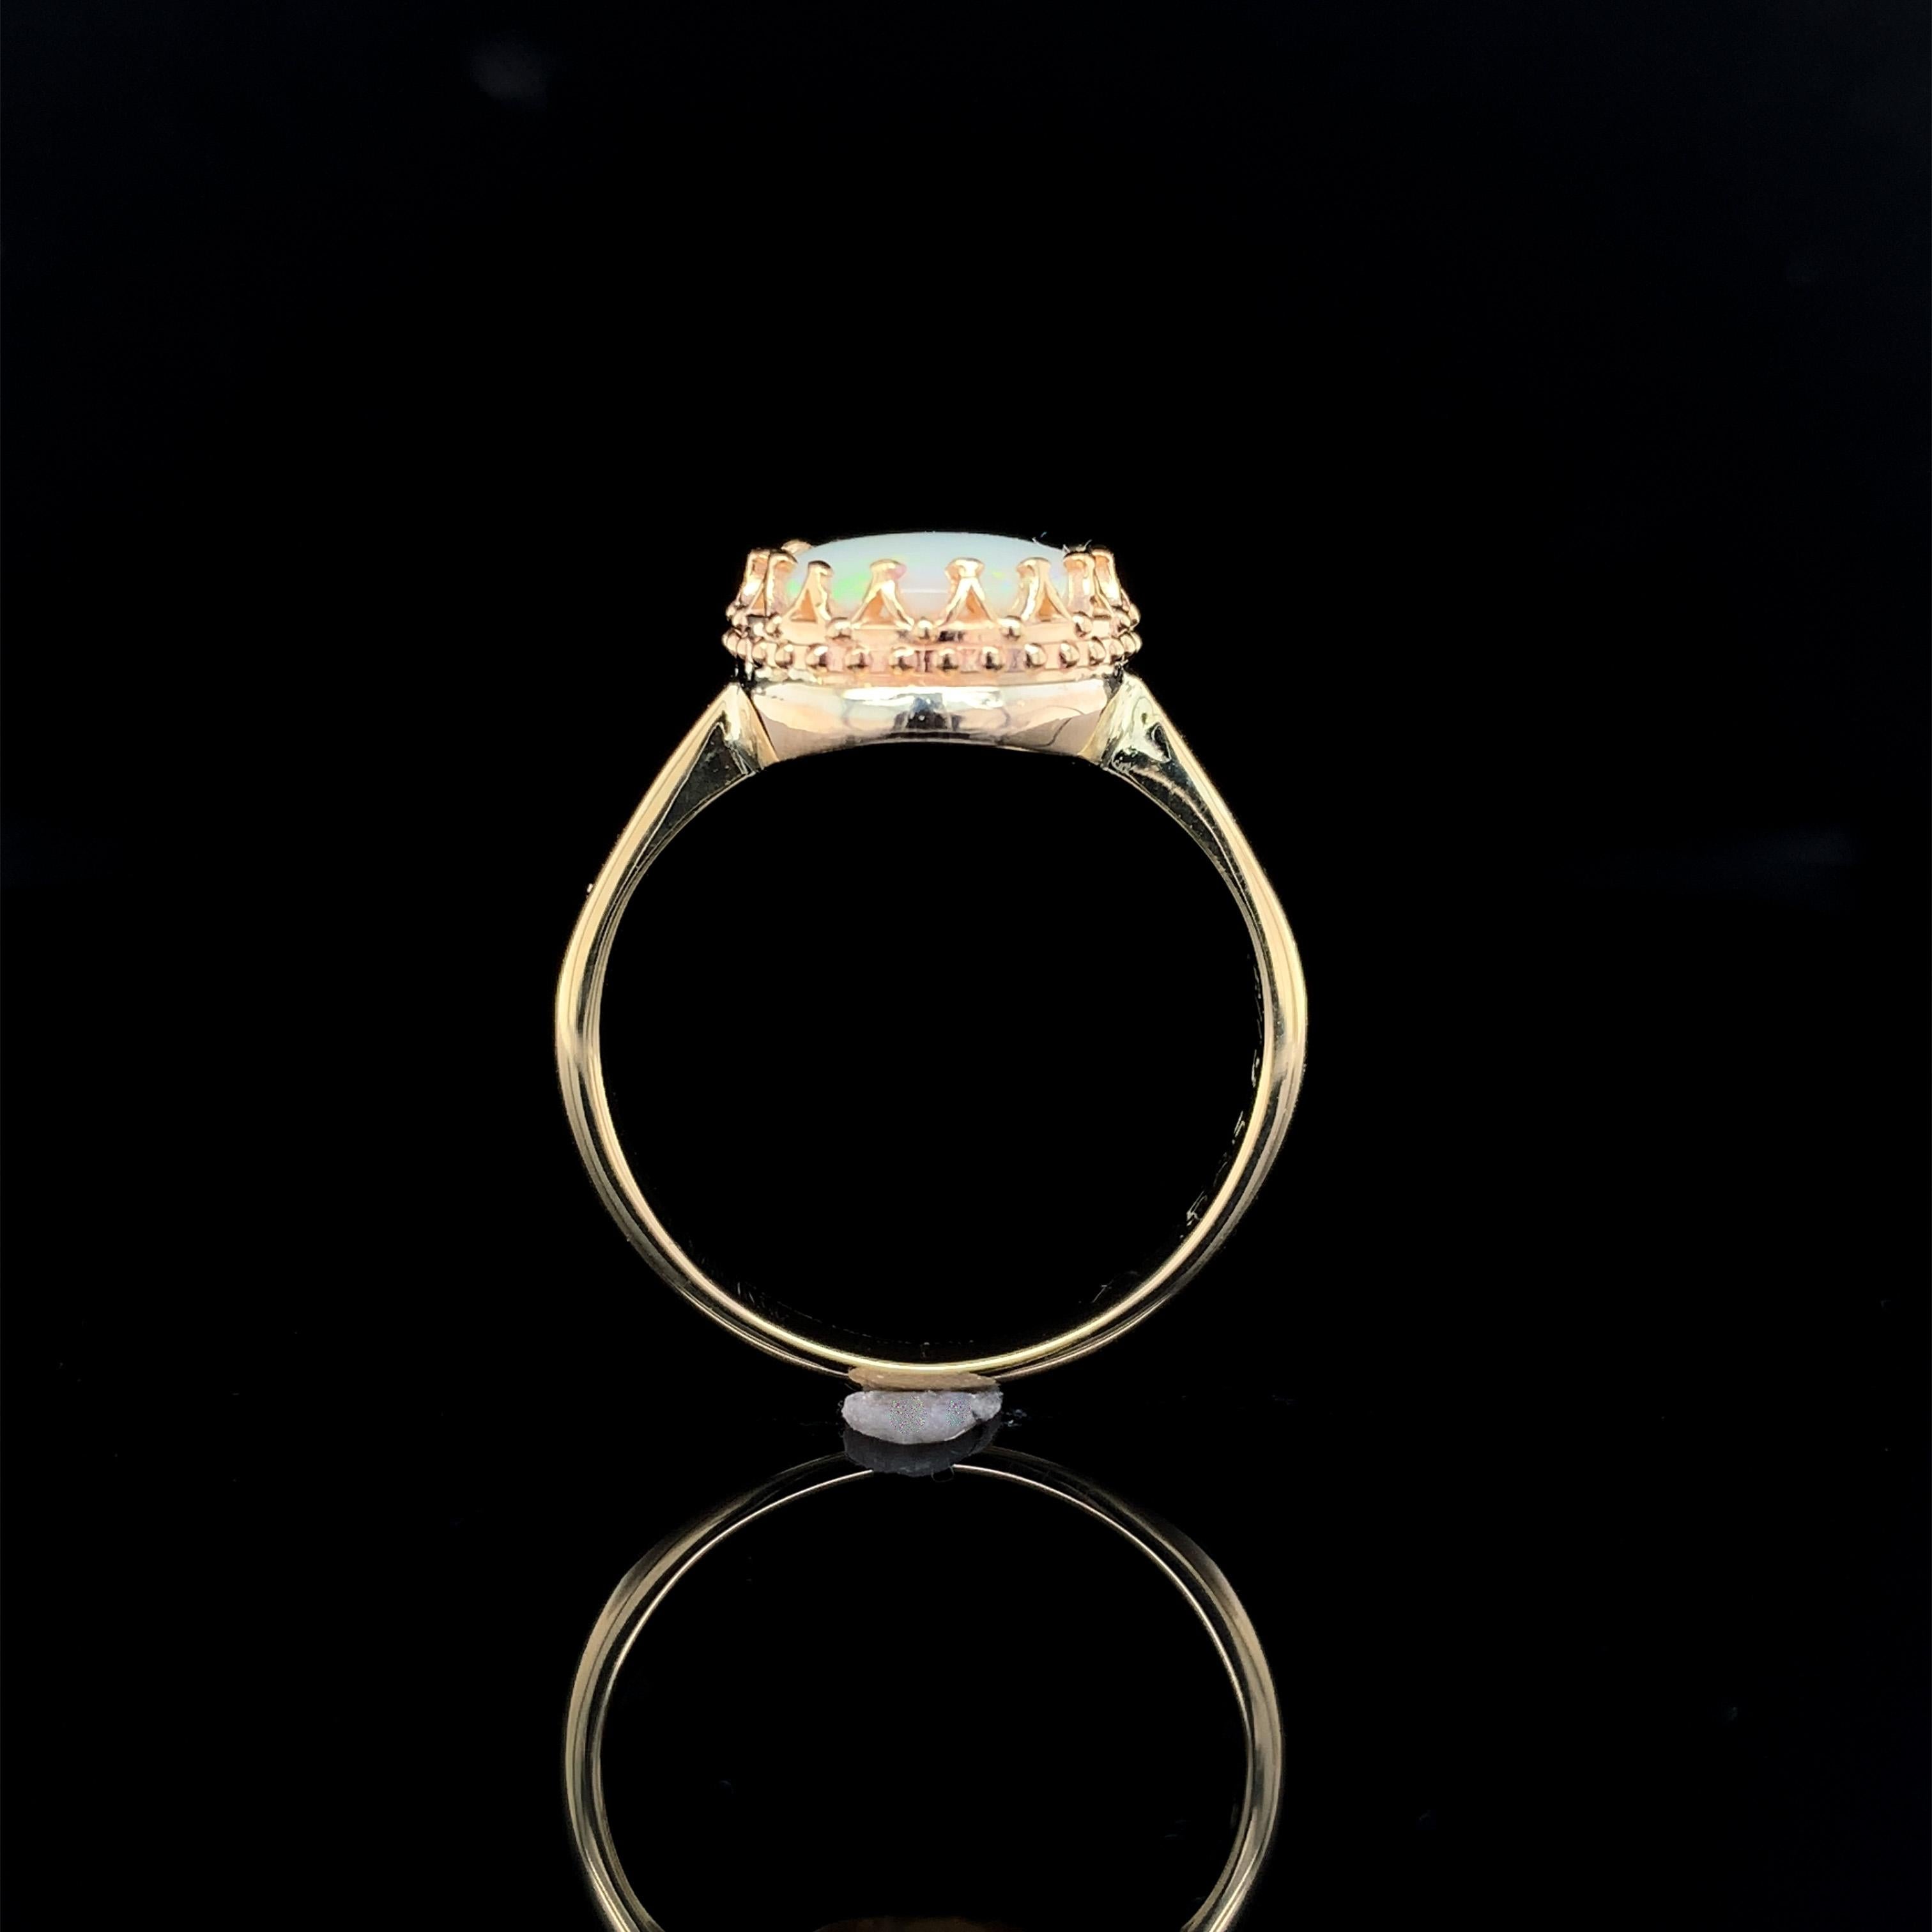 Vintage 14K yellow gold 1.80 carat opal ring. The genuine natural Australian opal measures about 11mm x 8.5mm. The opal is translucent and has primarily green play of color. The ring has evidence of a little hand engraving on the sides, engraving is